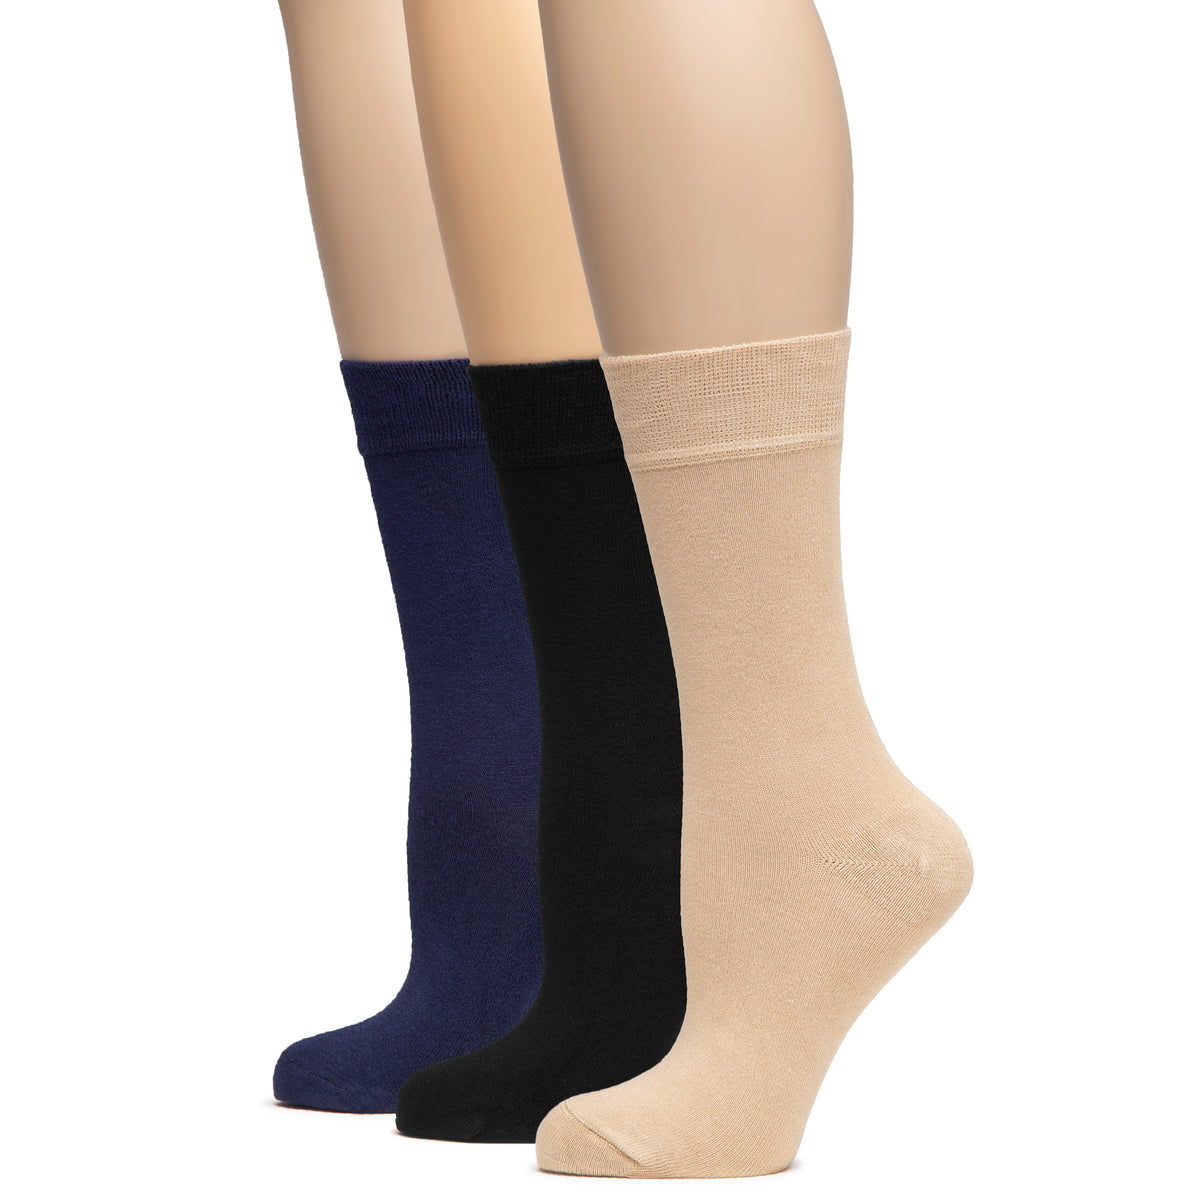 A trio of women's Bamboo Crew Socks in black, blue, and tan. Perfect for everyday wear and ultimate comfort.